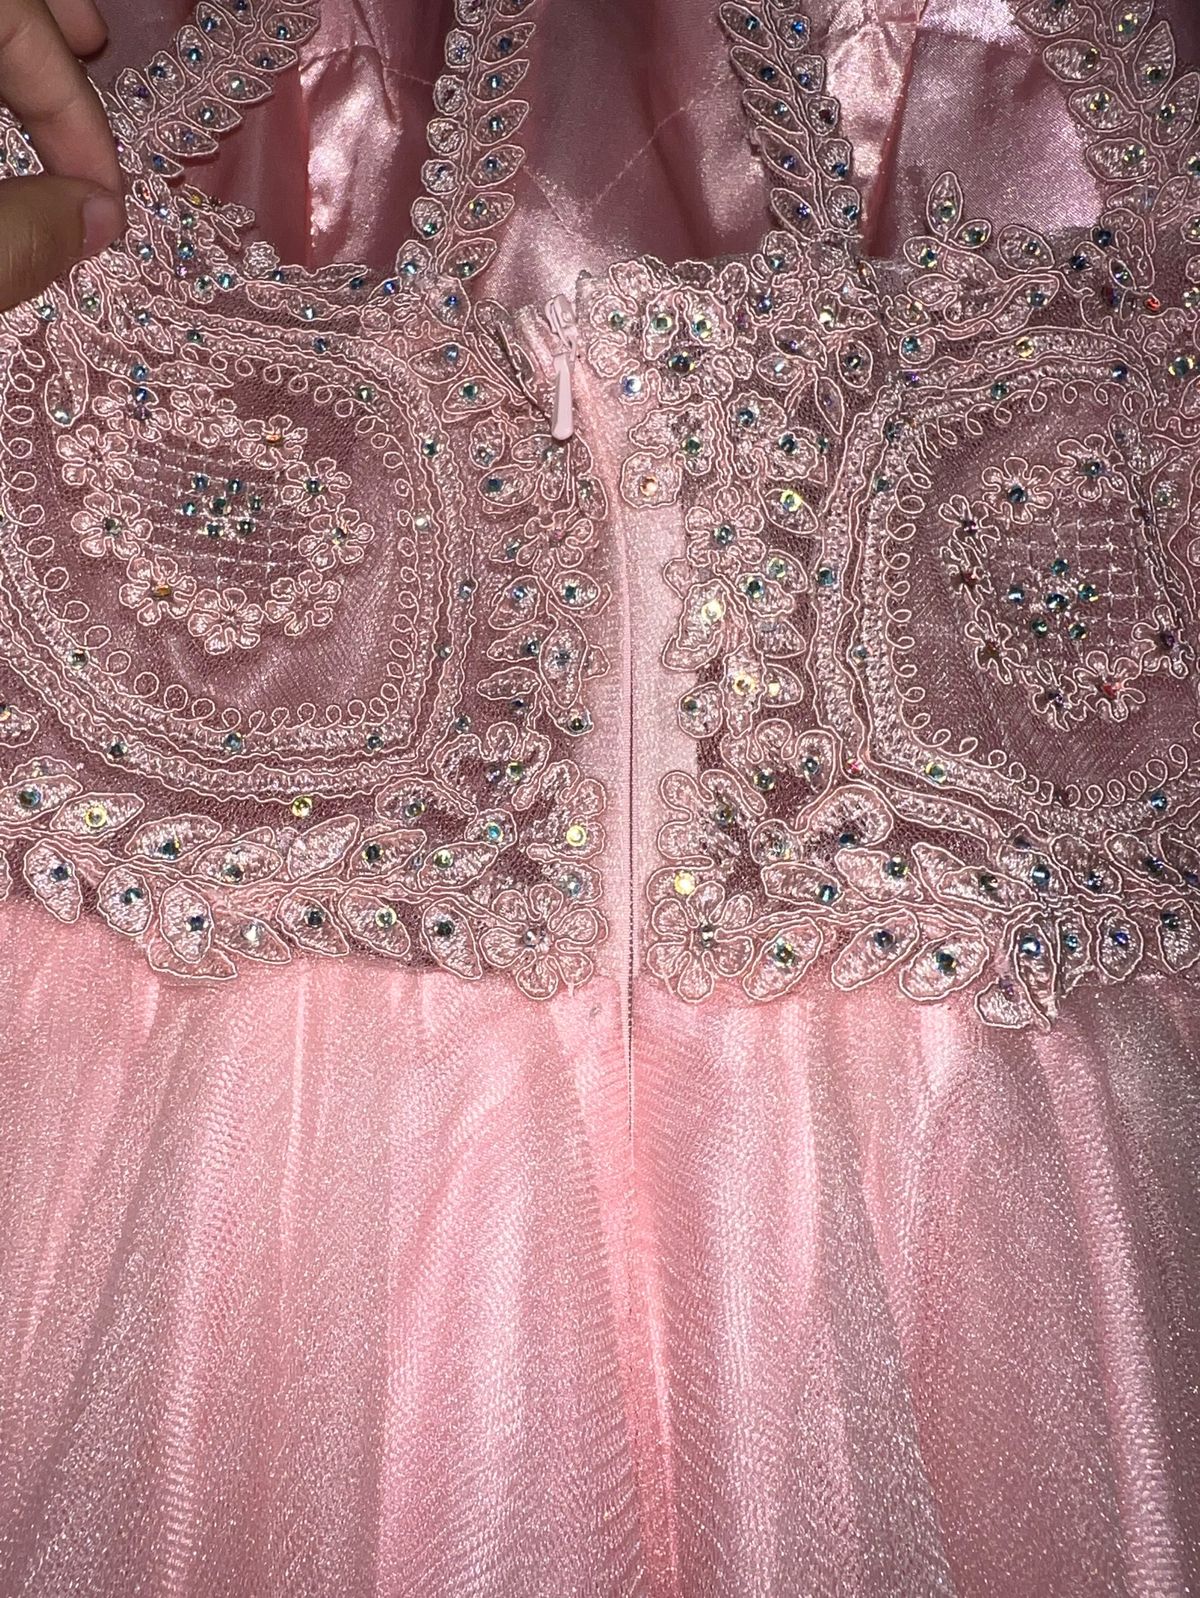 Girls Size 2 Halter Pink A-line Dress on Queenly